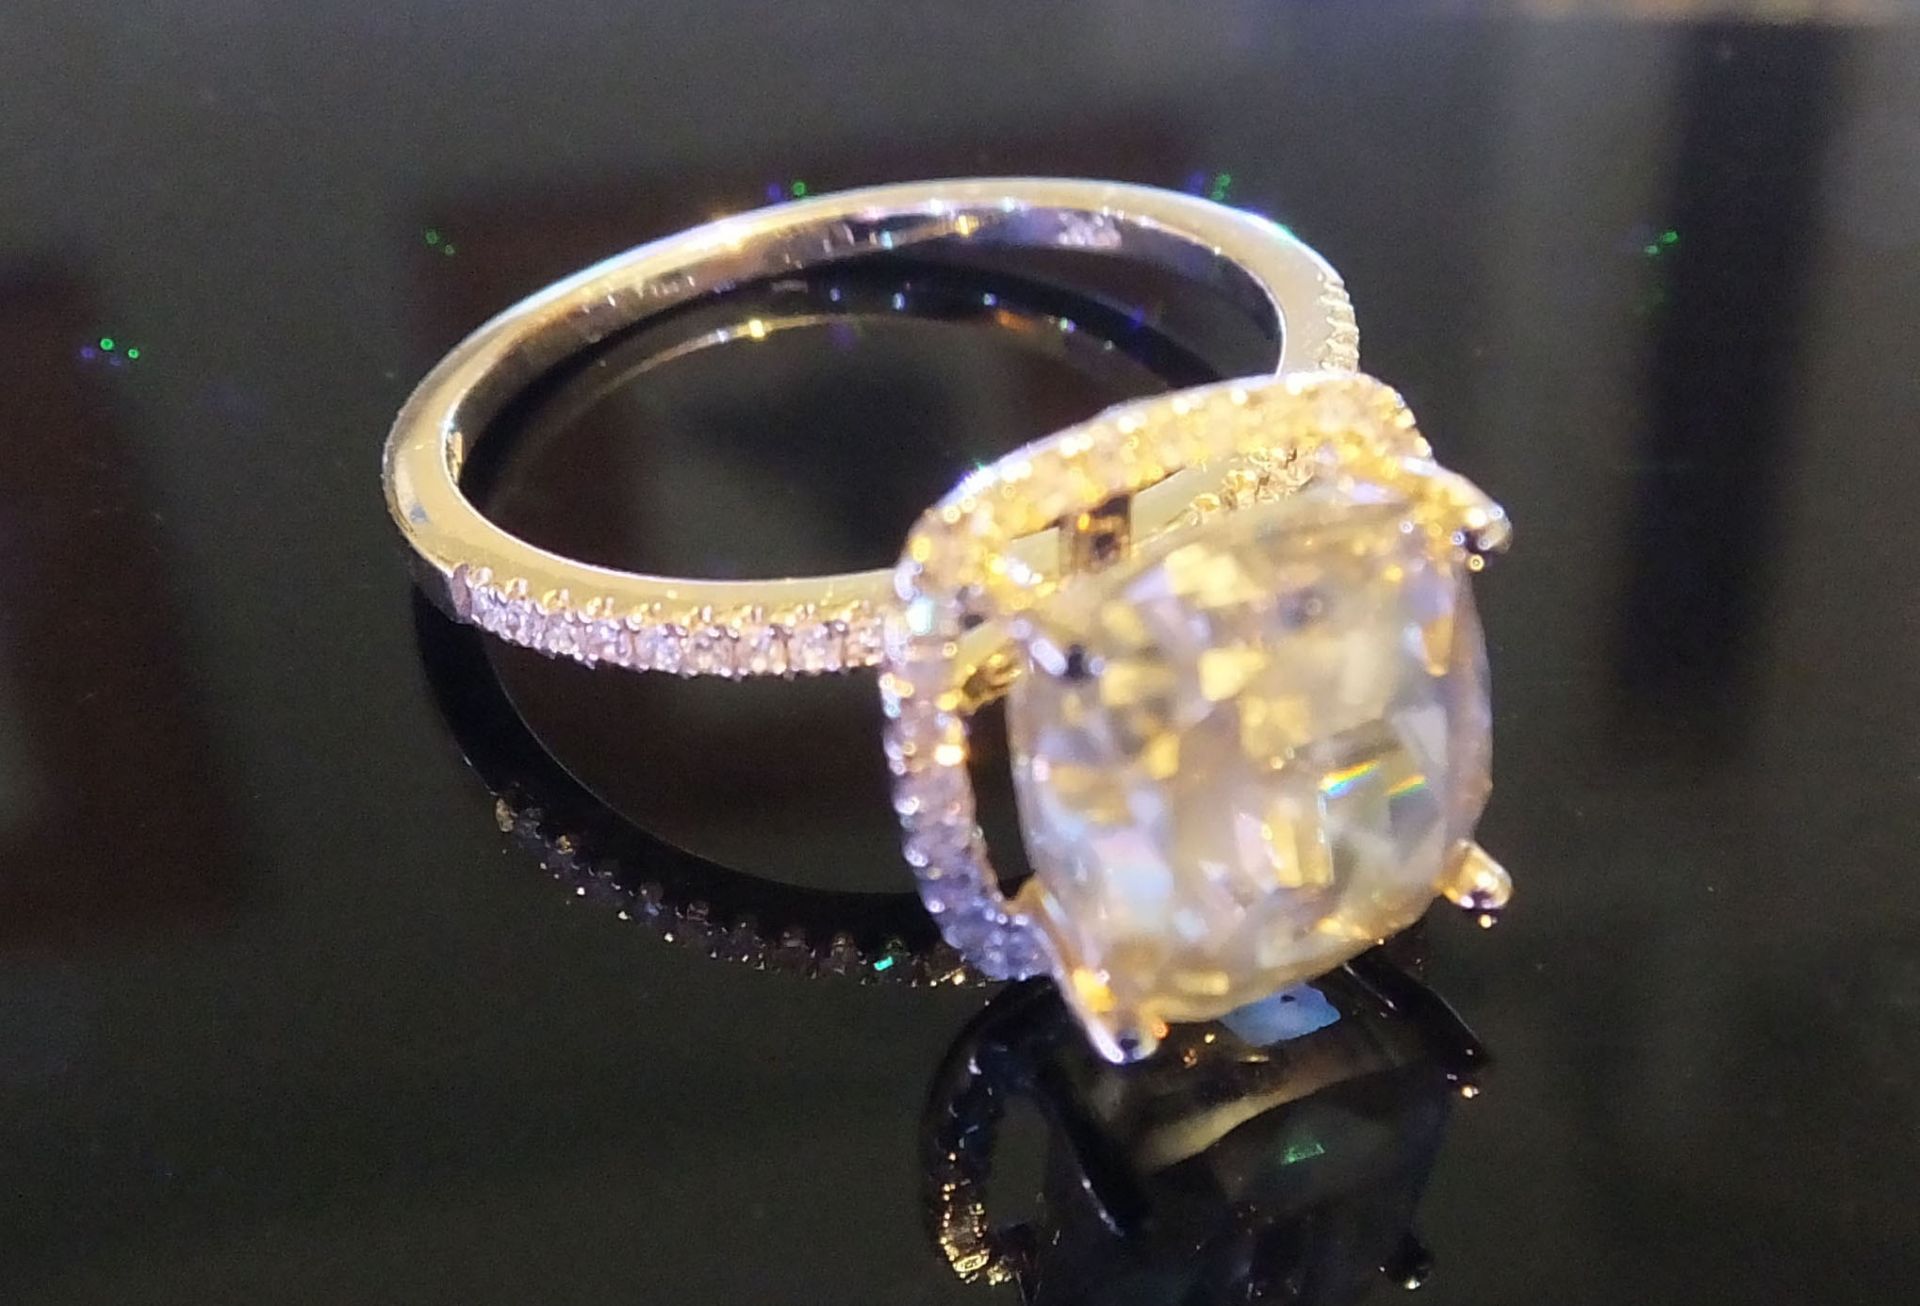 A 4.06 carat Cushion cut diamond, set in yellow gold Halo setting surrounded by diamonds. - Image 2 of 3